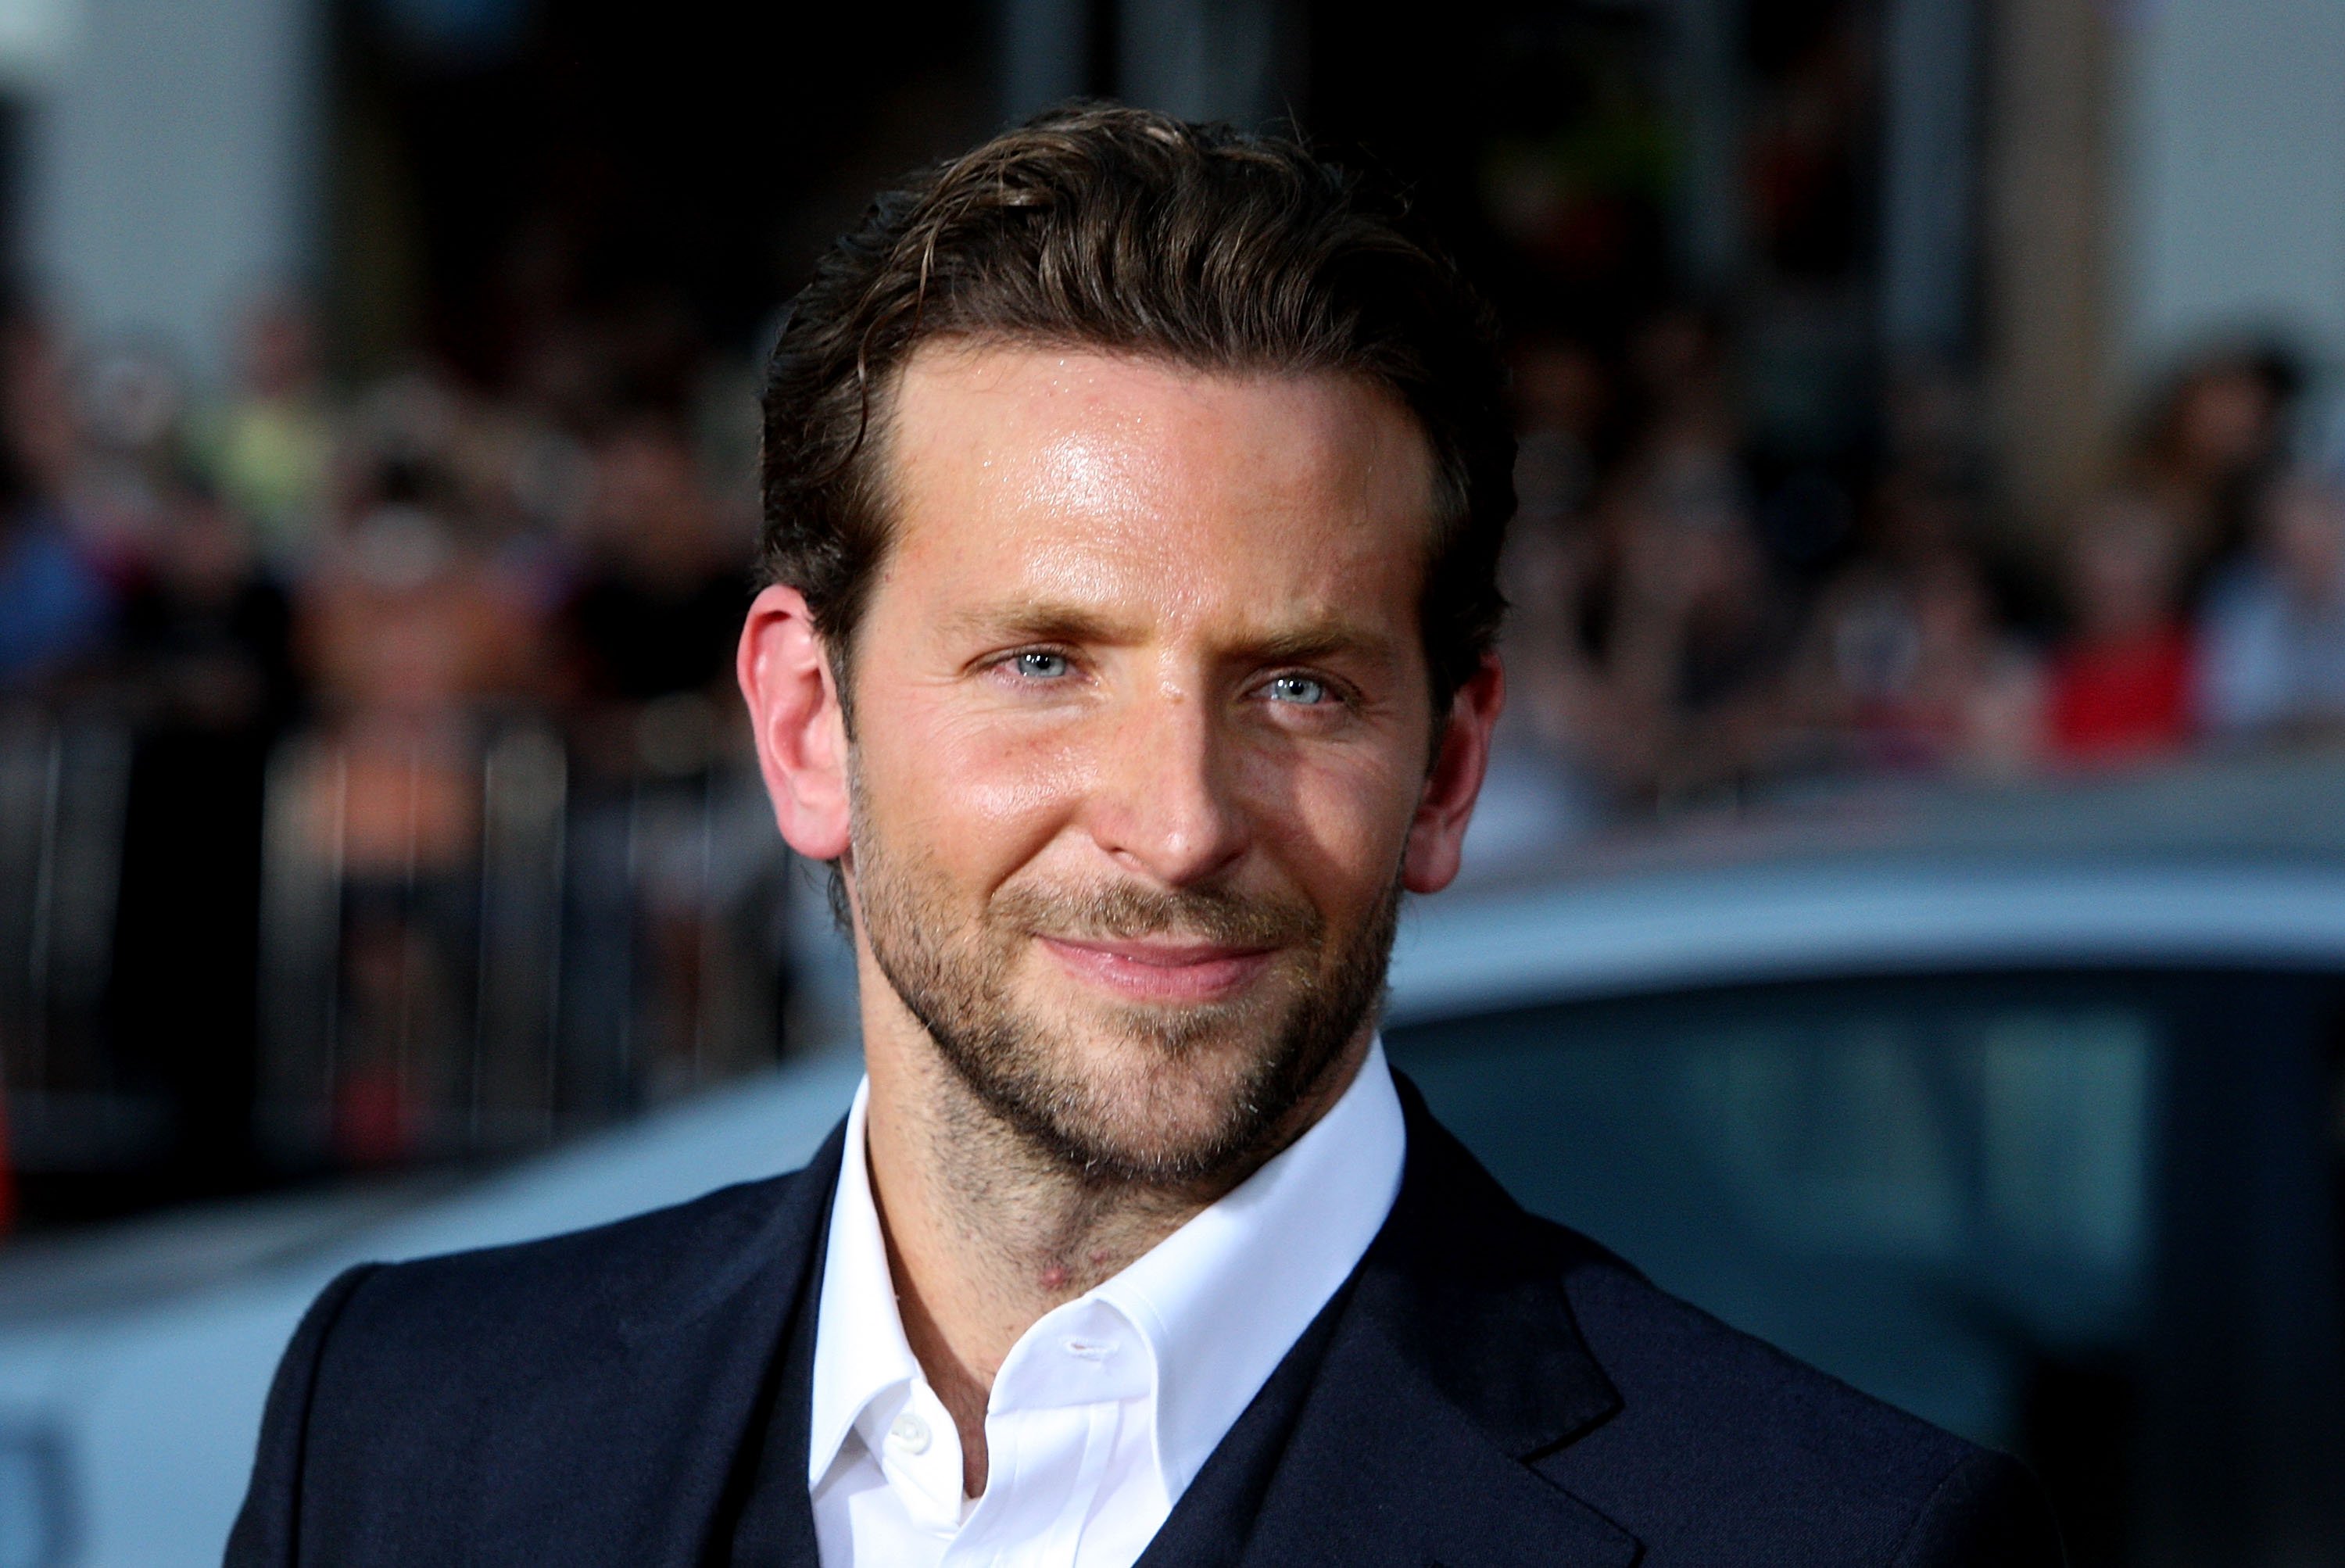 Bradley Cooper, star of Guillermo del Toro's Nightmare Alley movie, promoting a movie for 20th Century